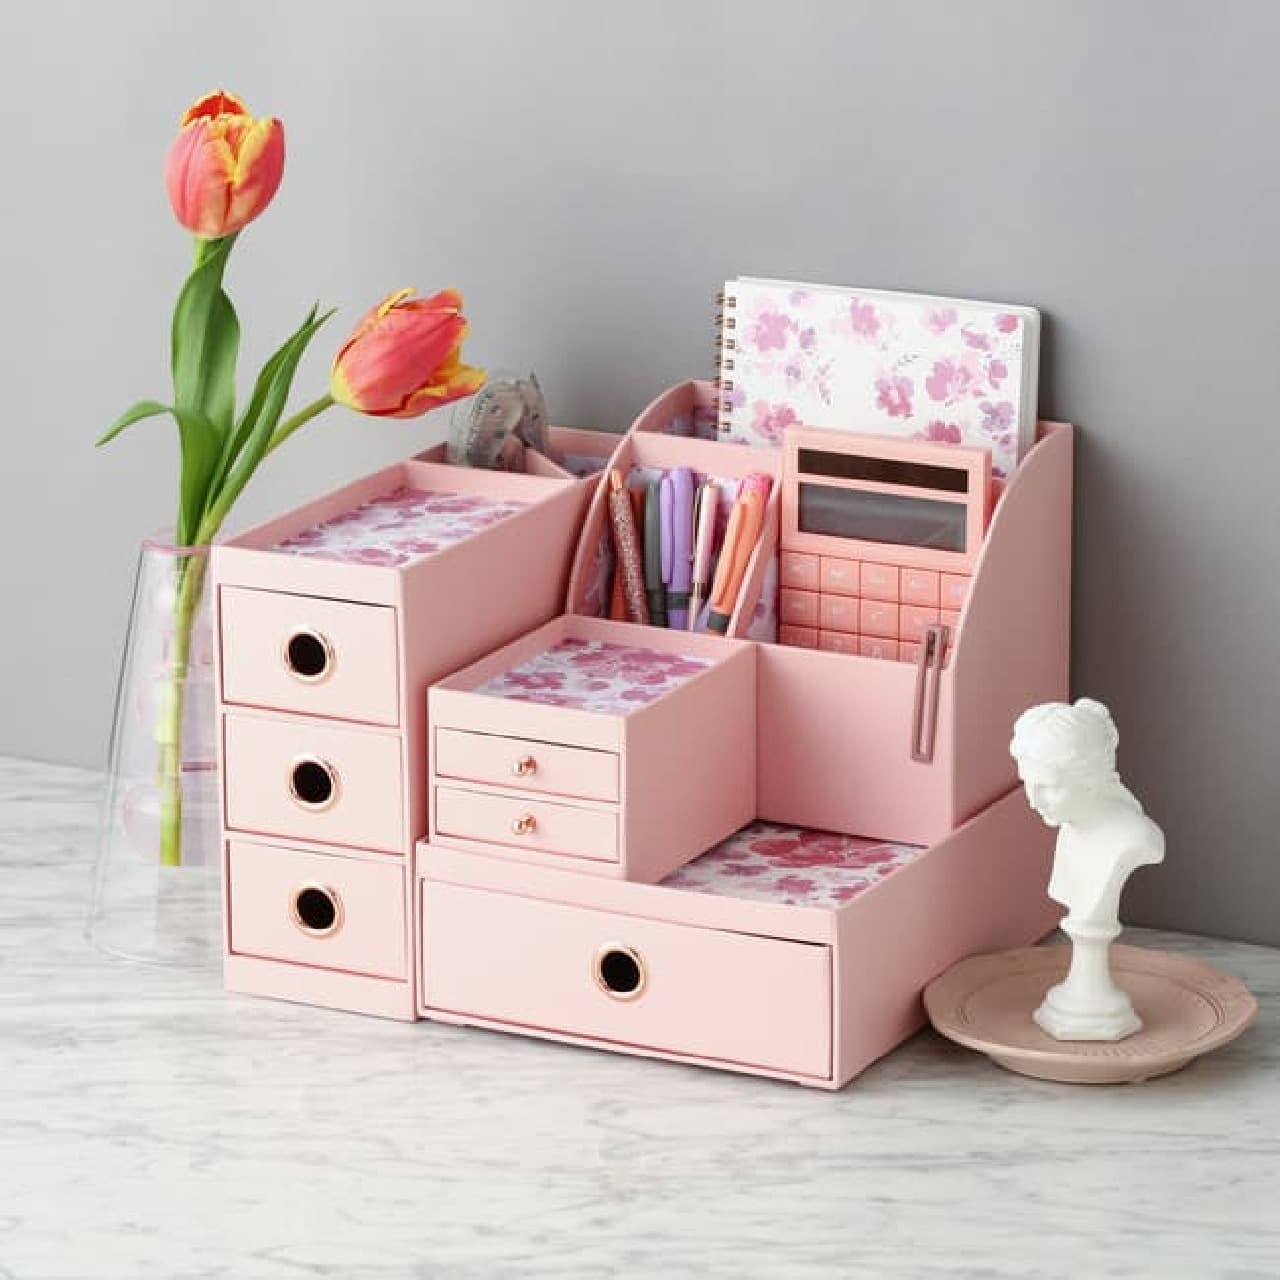 Francfranc] Lace Pattern Stationery Box, Chest of Drawers with Pen Stand, etc. -- Desktop Storage for Remote Work